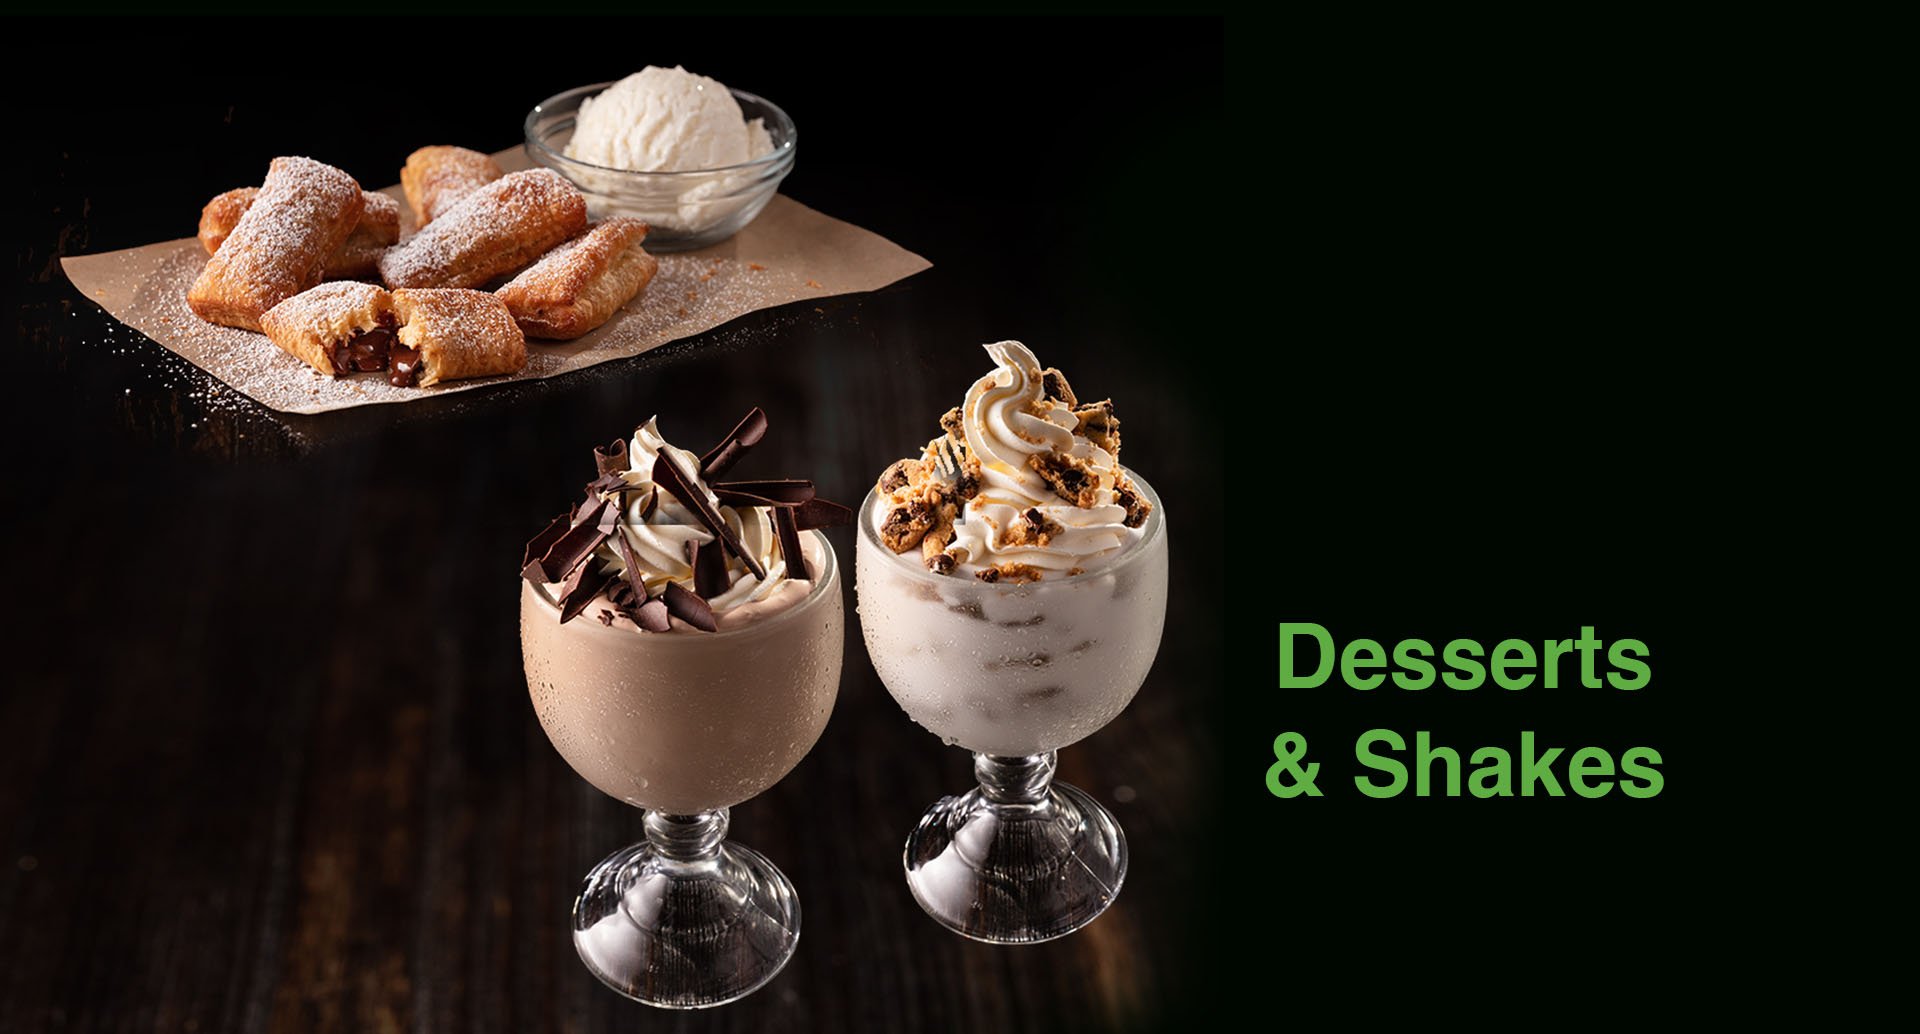 Desserts and Shakes